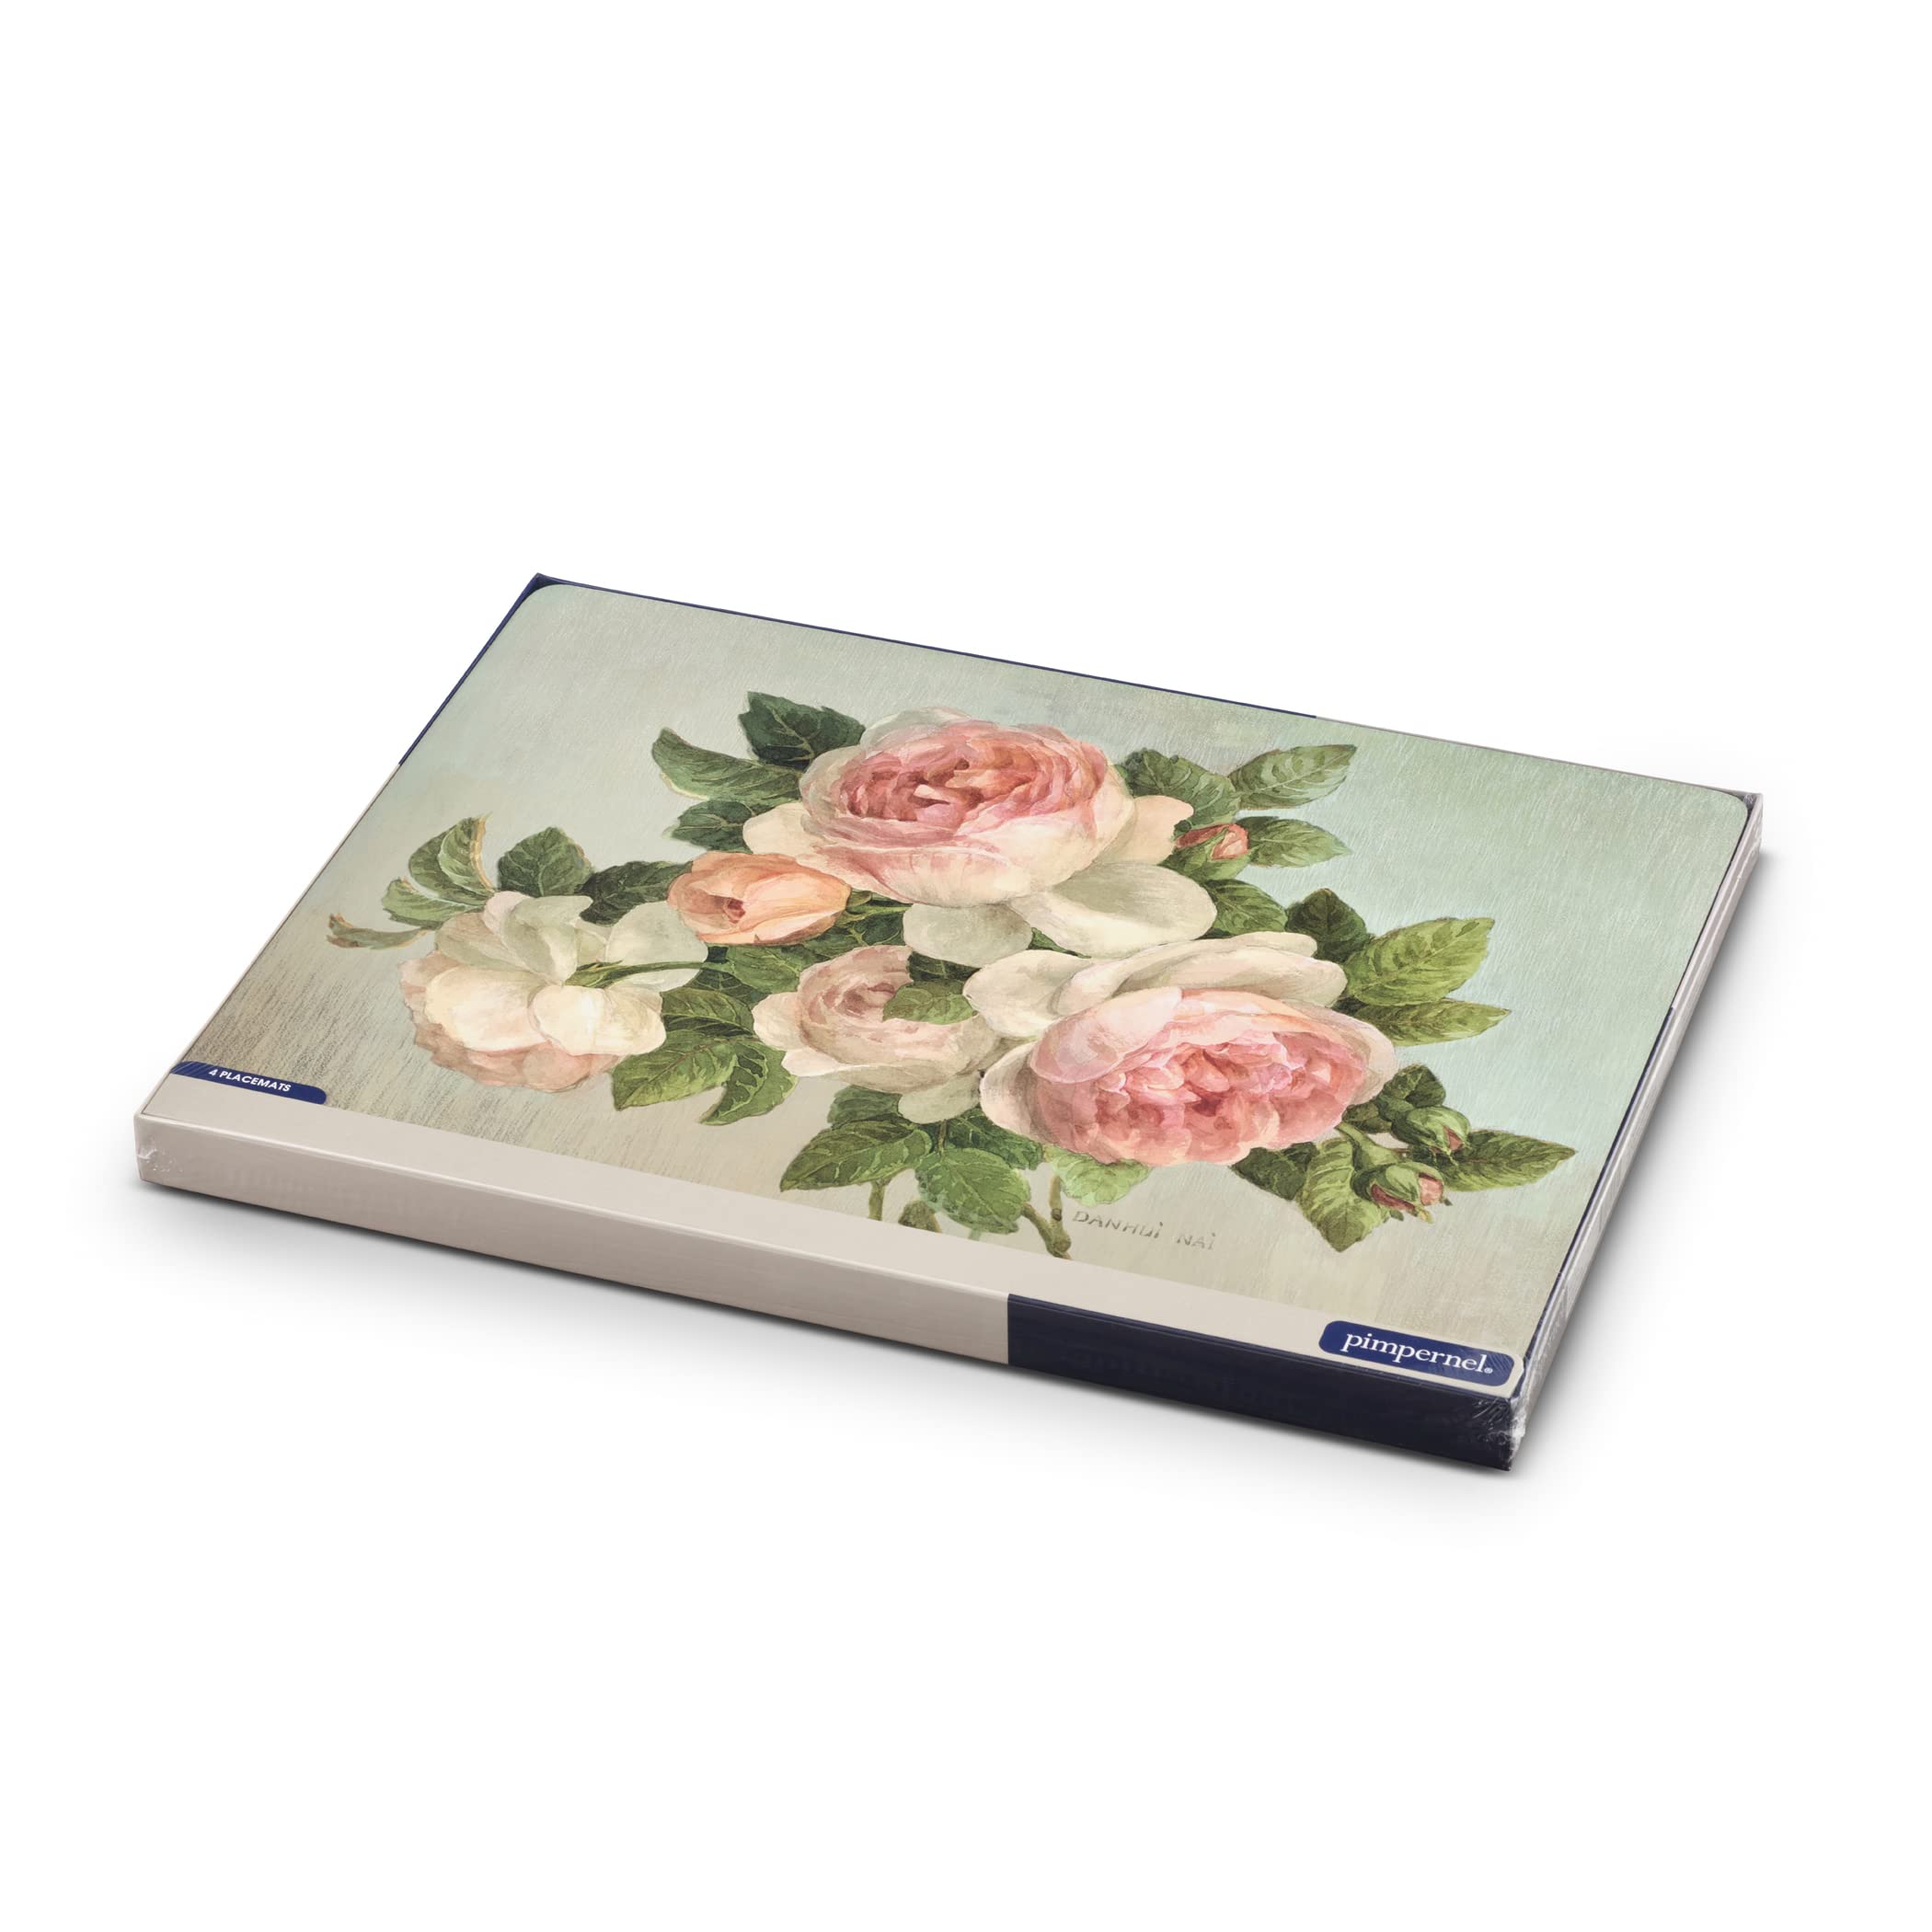 Pimpernel Antique Roses Collection Placemats | Set of 4 | Heat Resistant Mats | Cork-Backed Board | Hard Placemat Set for Dining Table | Measures 15.7” x 11.7”